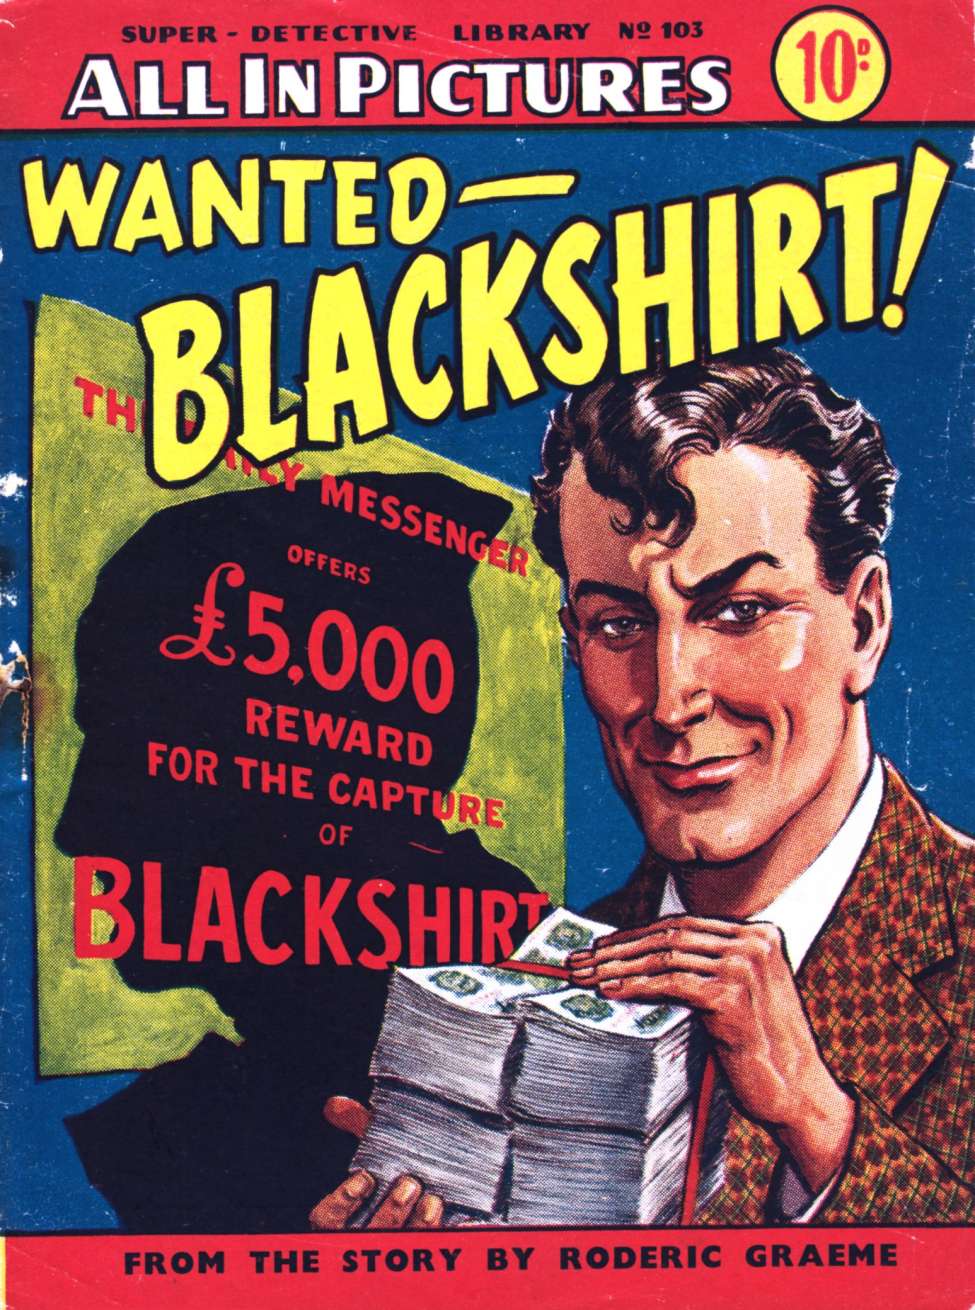 Book Cover For Super Detective Library 103 - Wanted Blackshirt